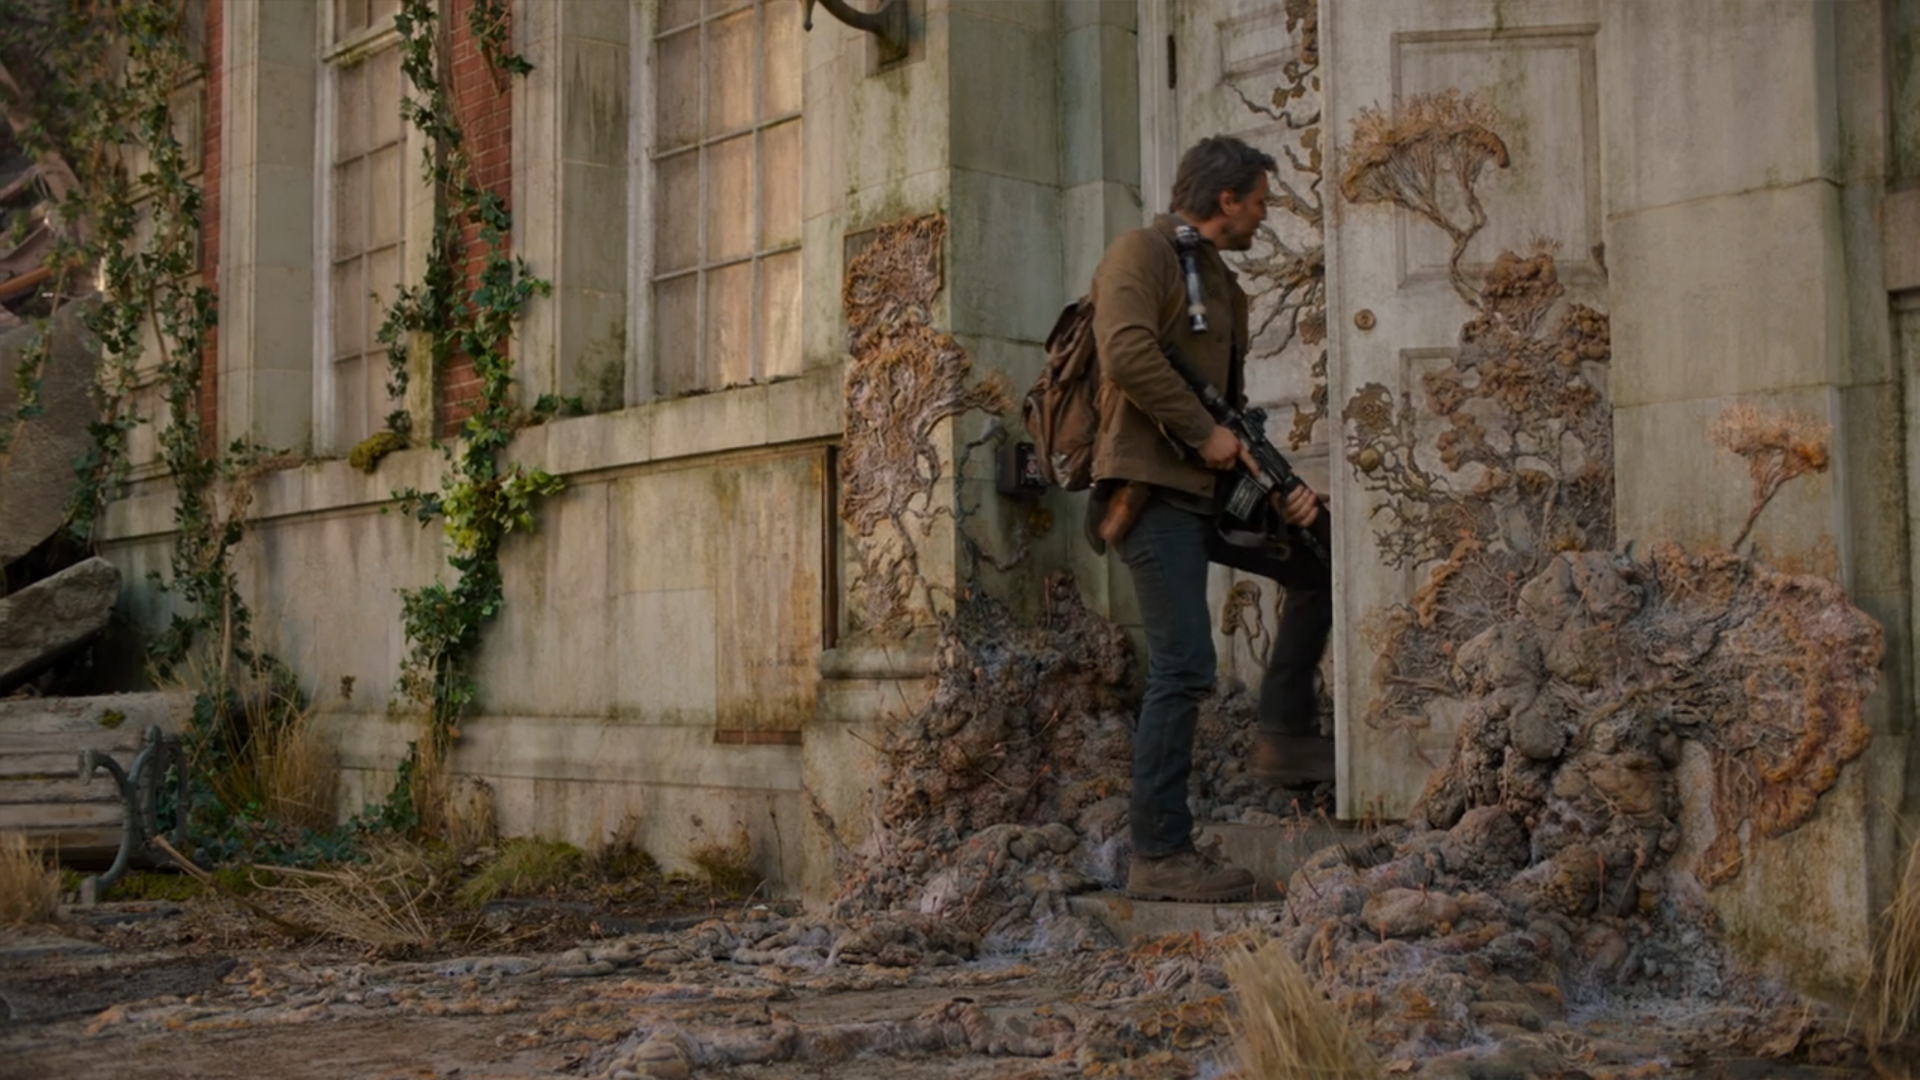 The Last of Us': What to Know About the HBO Zombie Series Starring